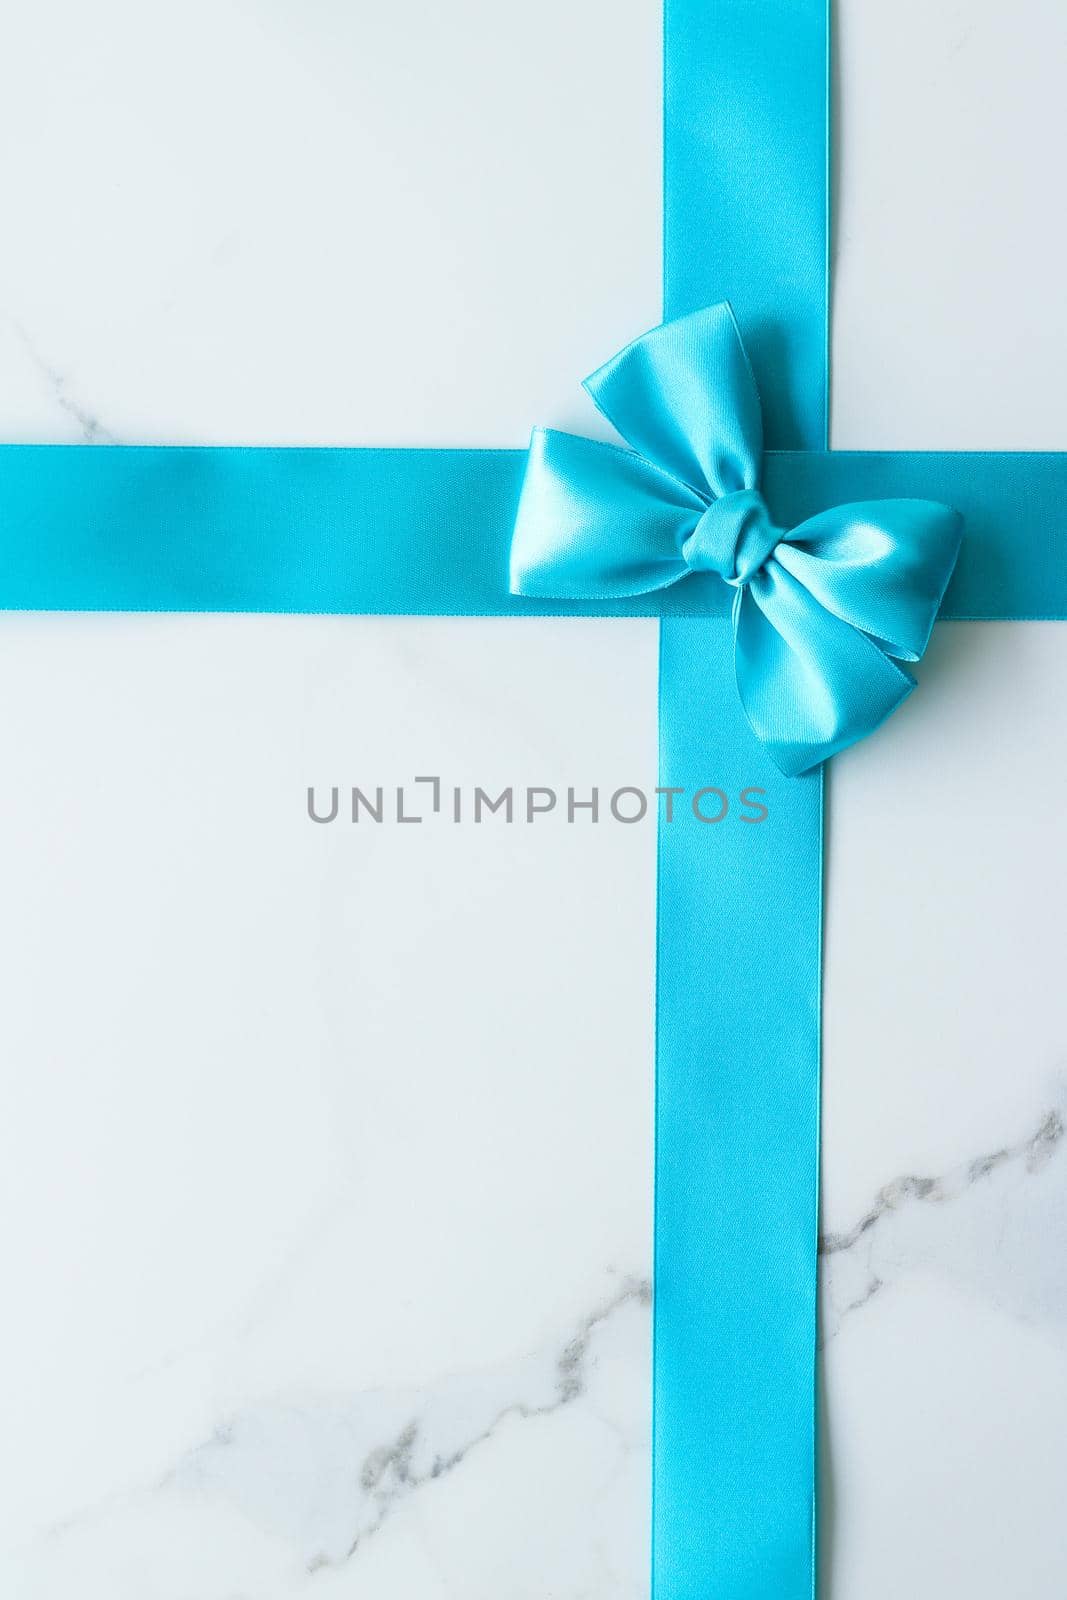 Holiday decor, feminine design and flatlay concept - Blue silk ribbon on marble, top view